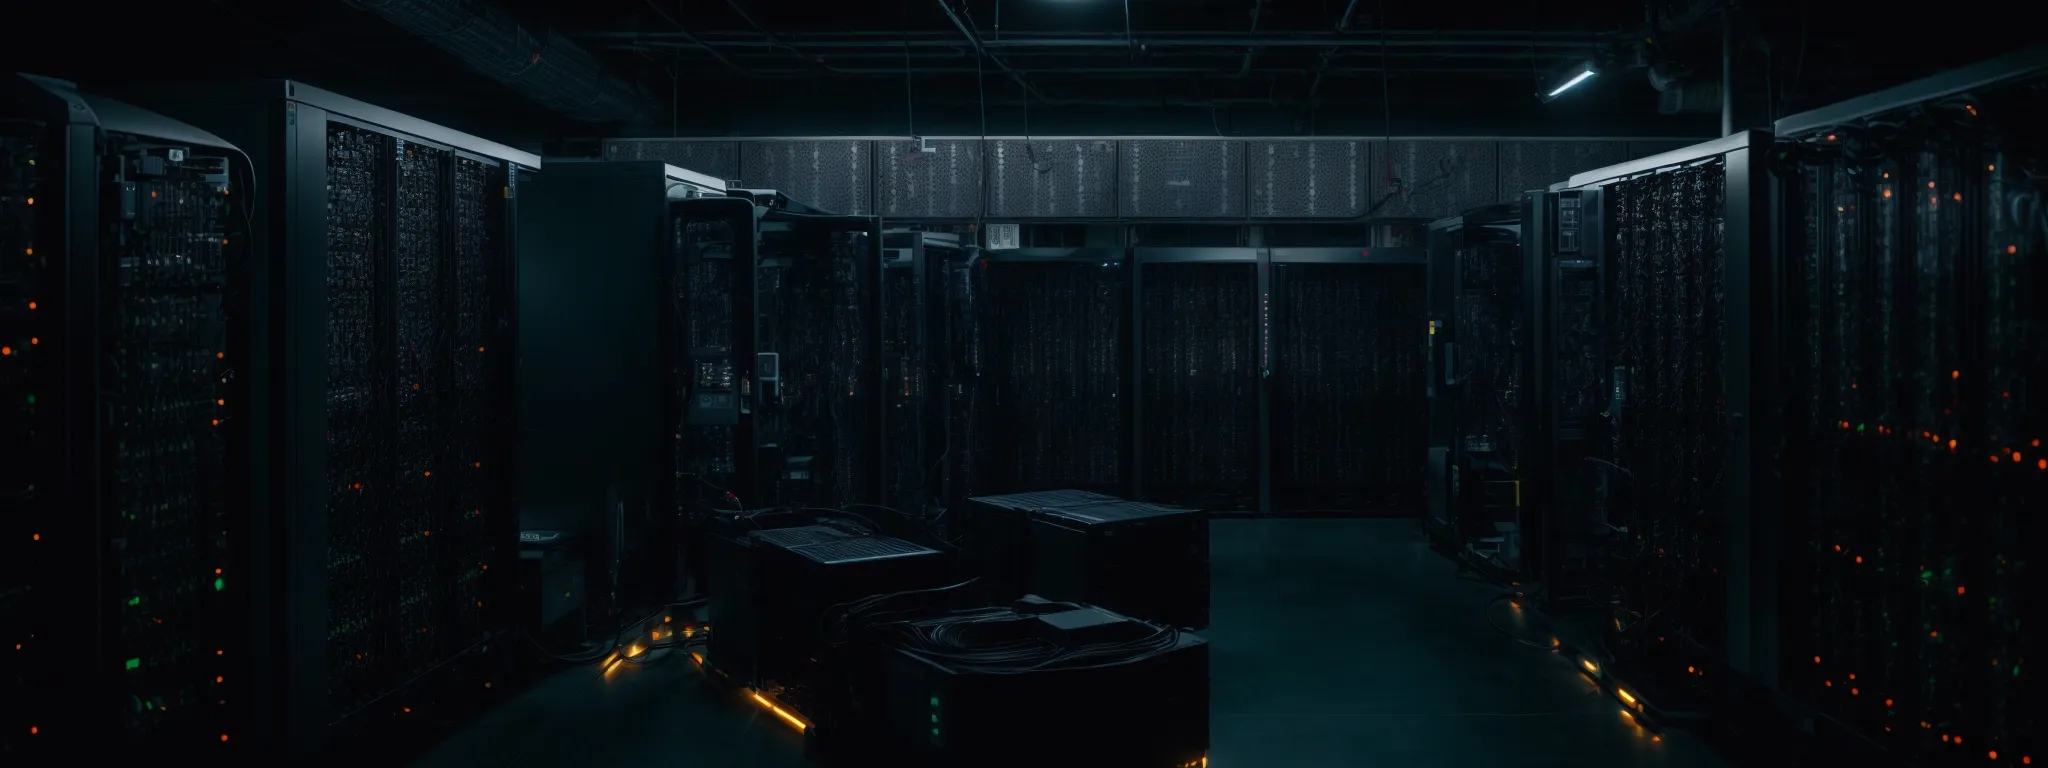 rows of servers and data storage equipment illuminate a dimly lit data center.